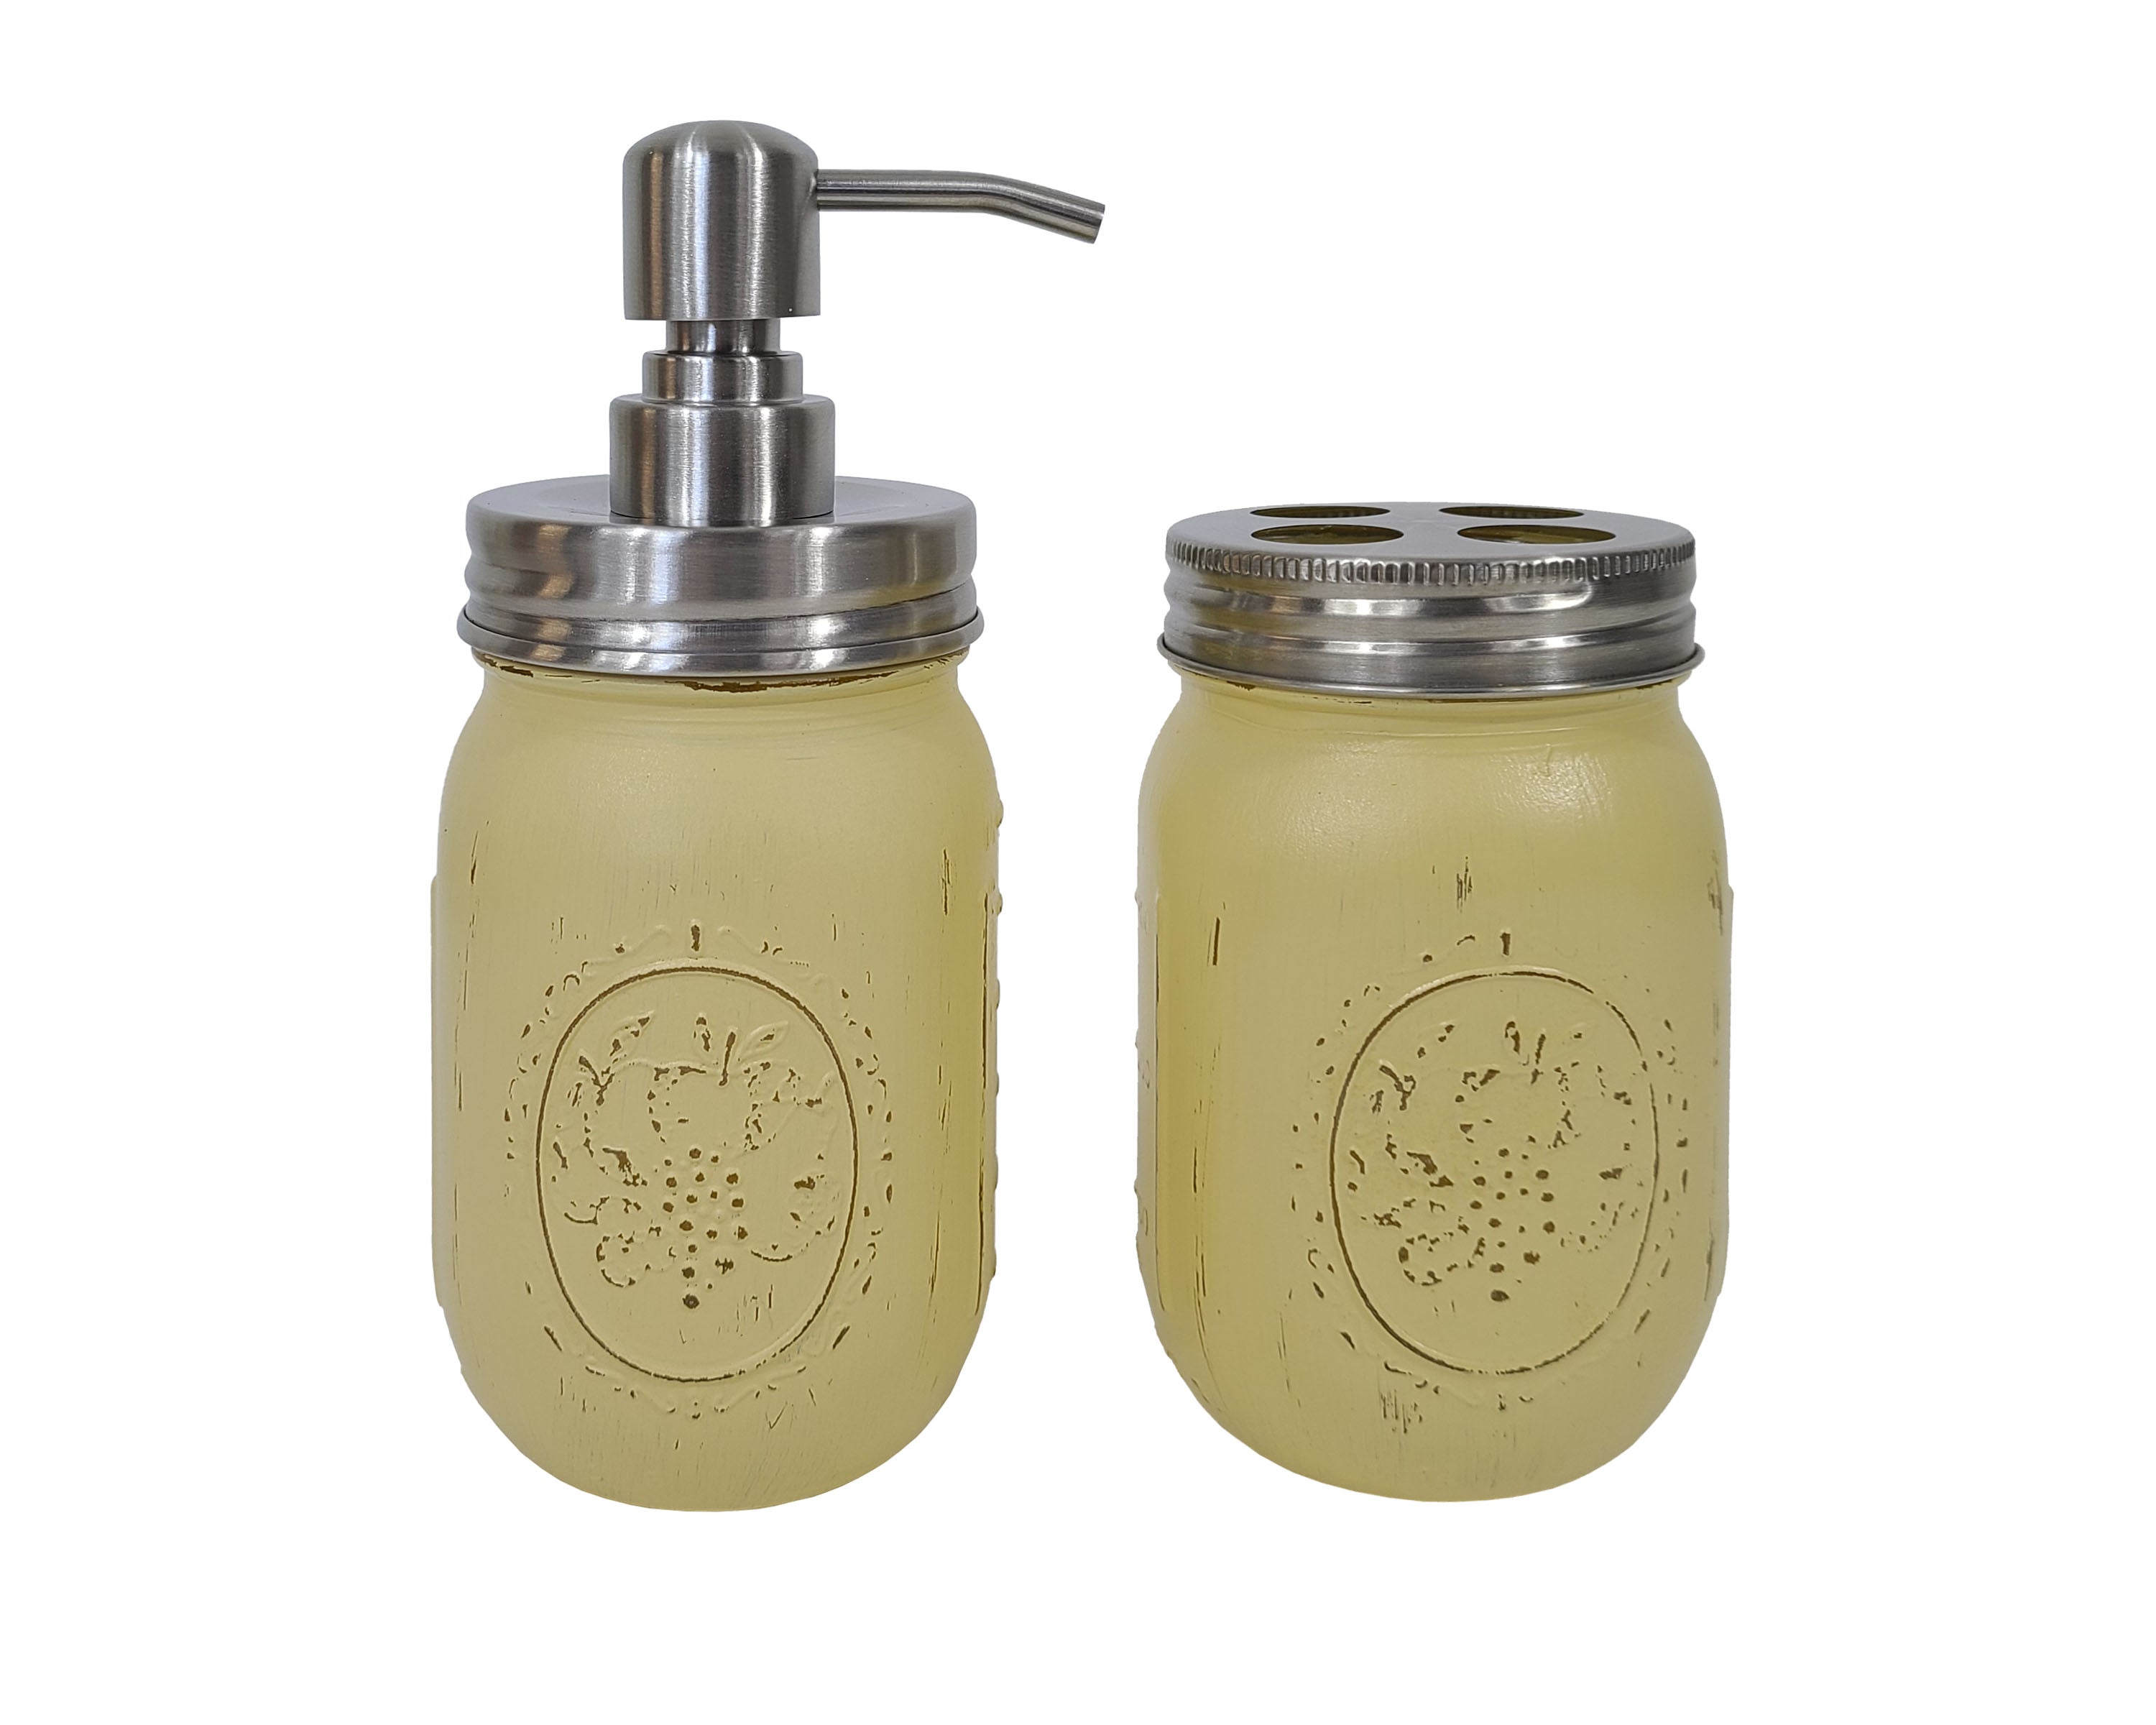 Mason Jar Soap Pump & Toothbrush Holder Set, Shown in Canary Yellow with Silver Lids